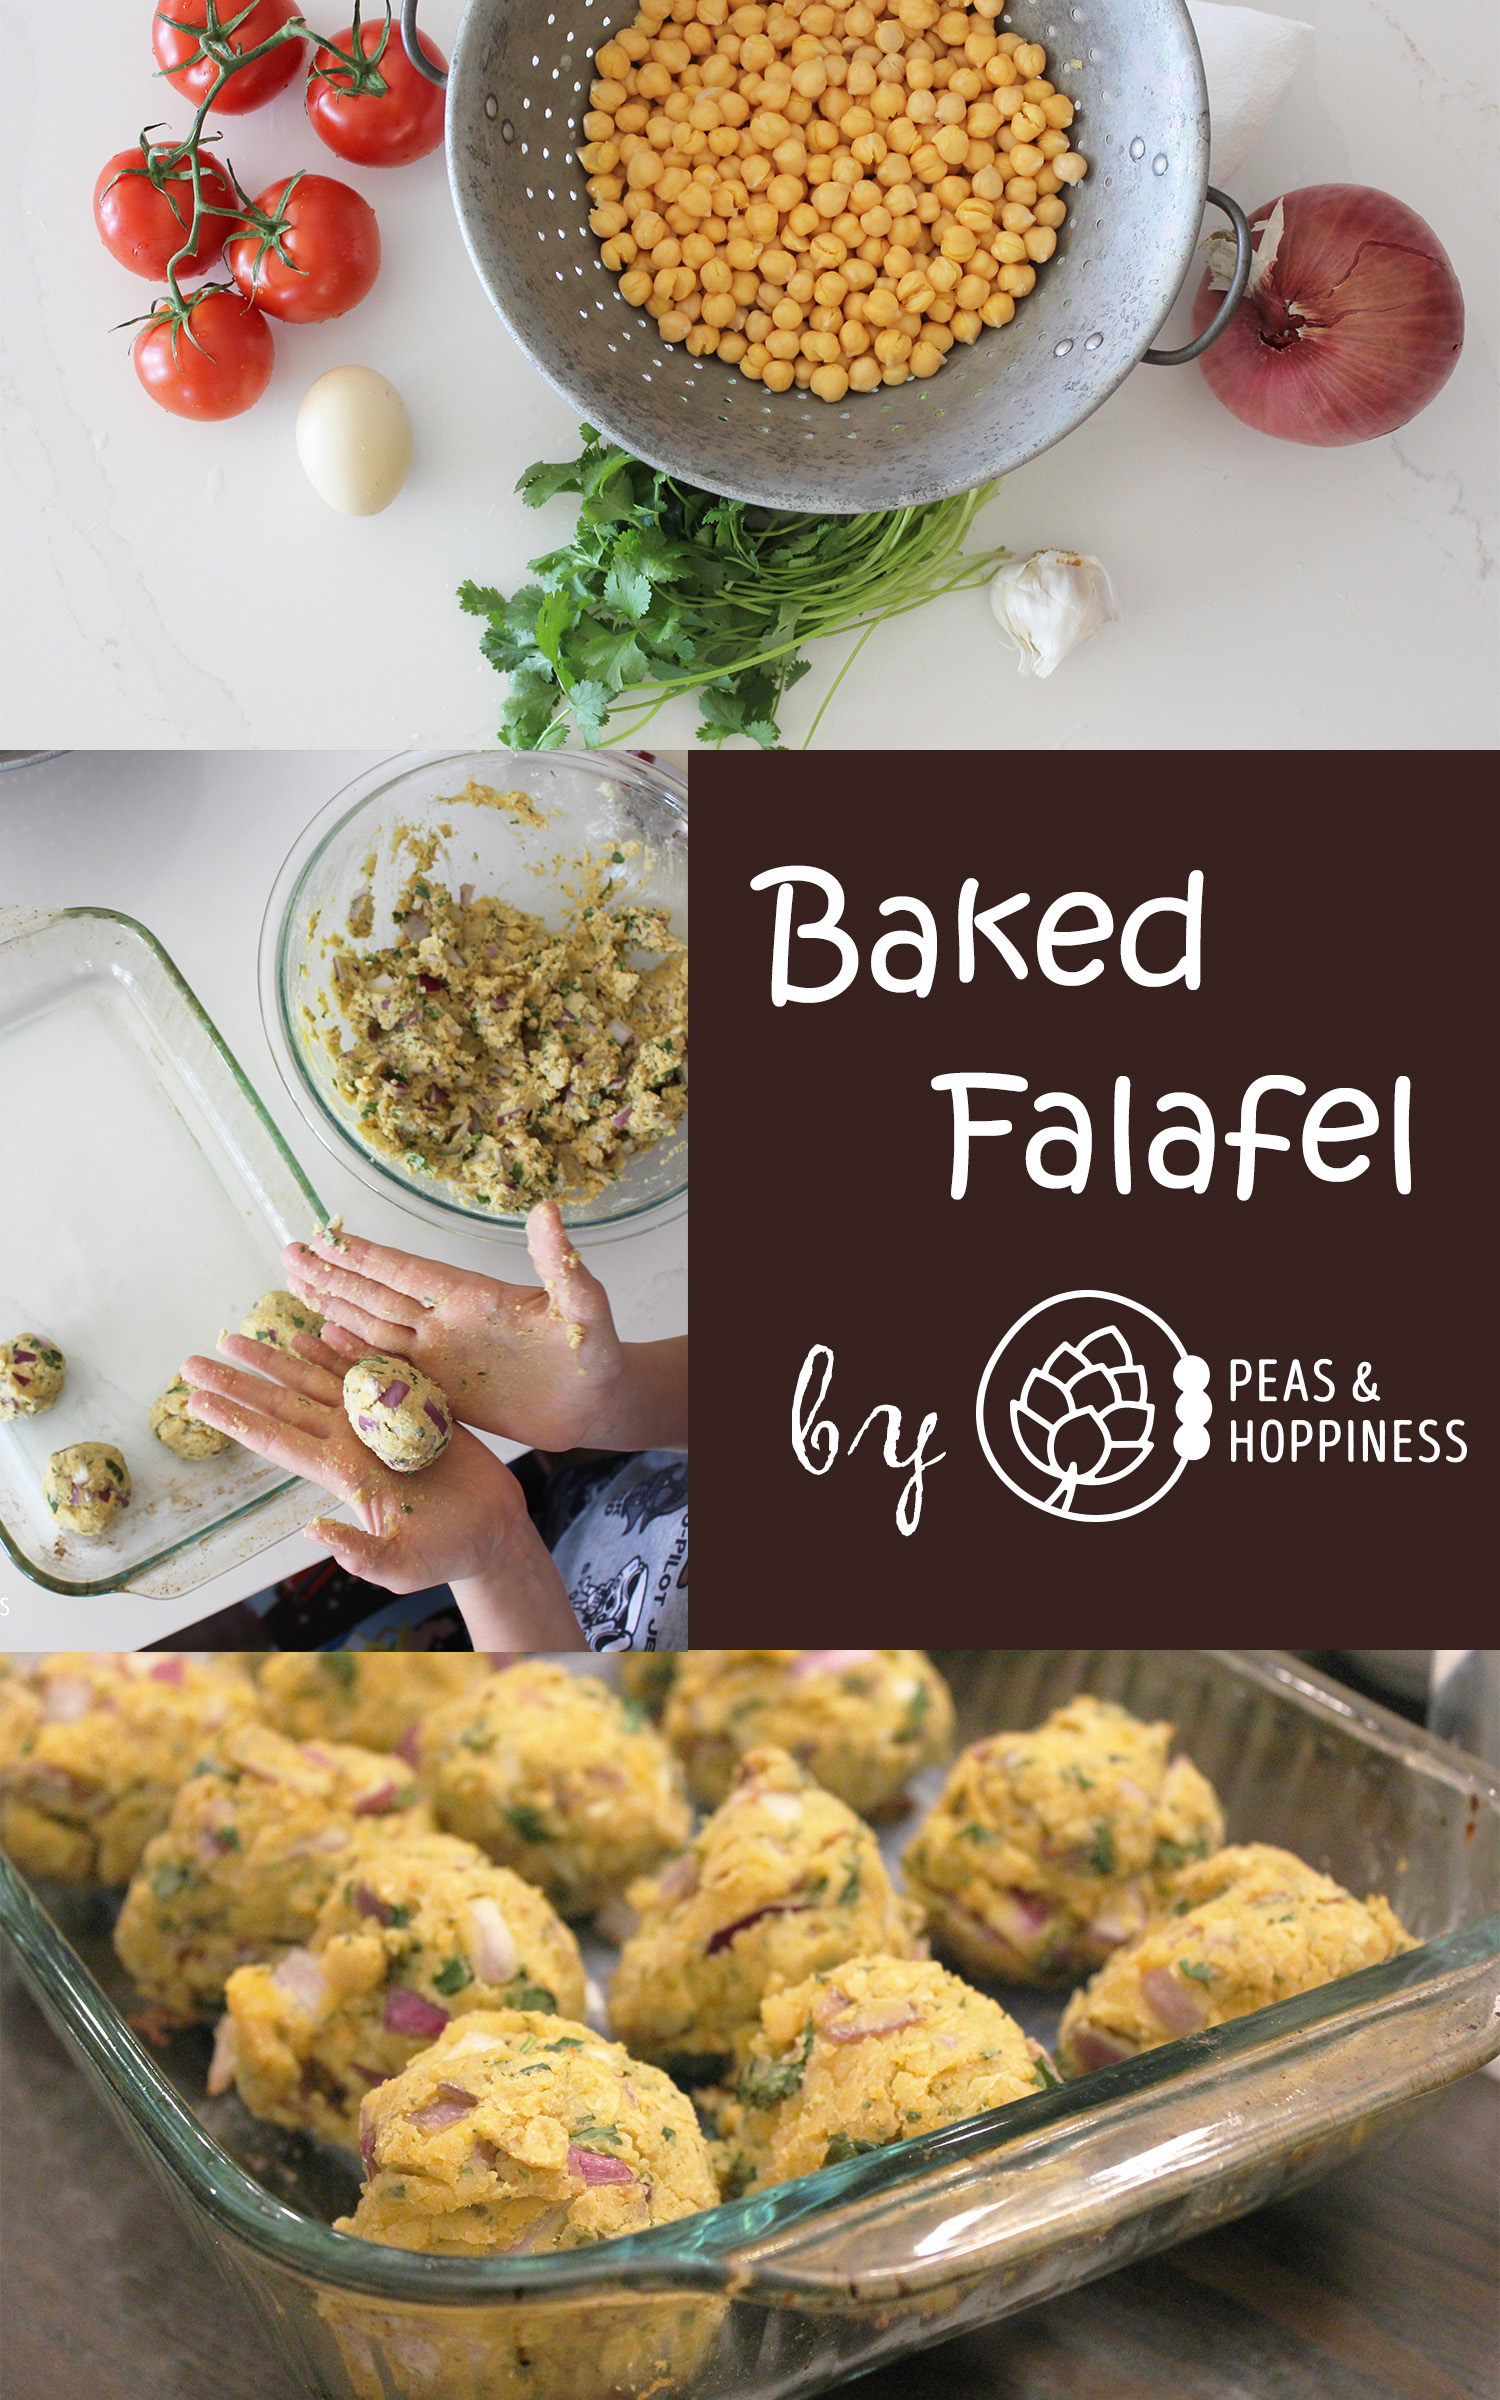 Baked Falafel from Peas and Hoppiness - www.peasandhoppinesscom